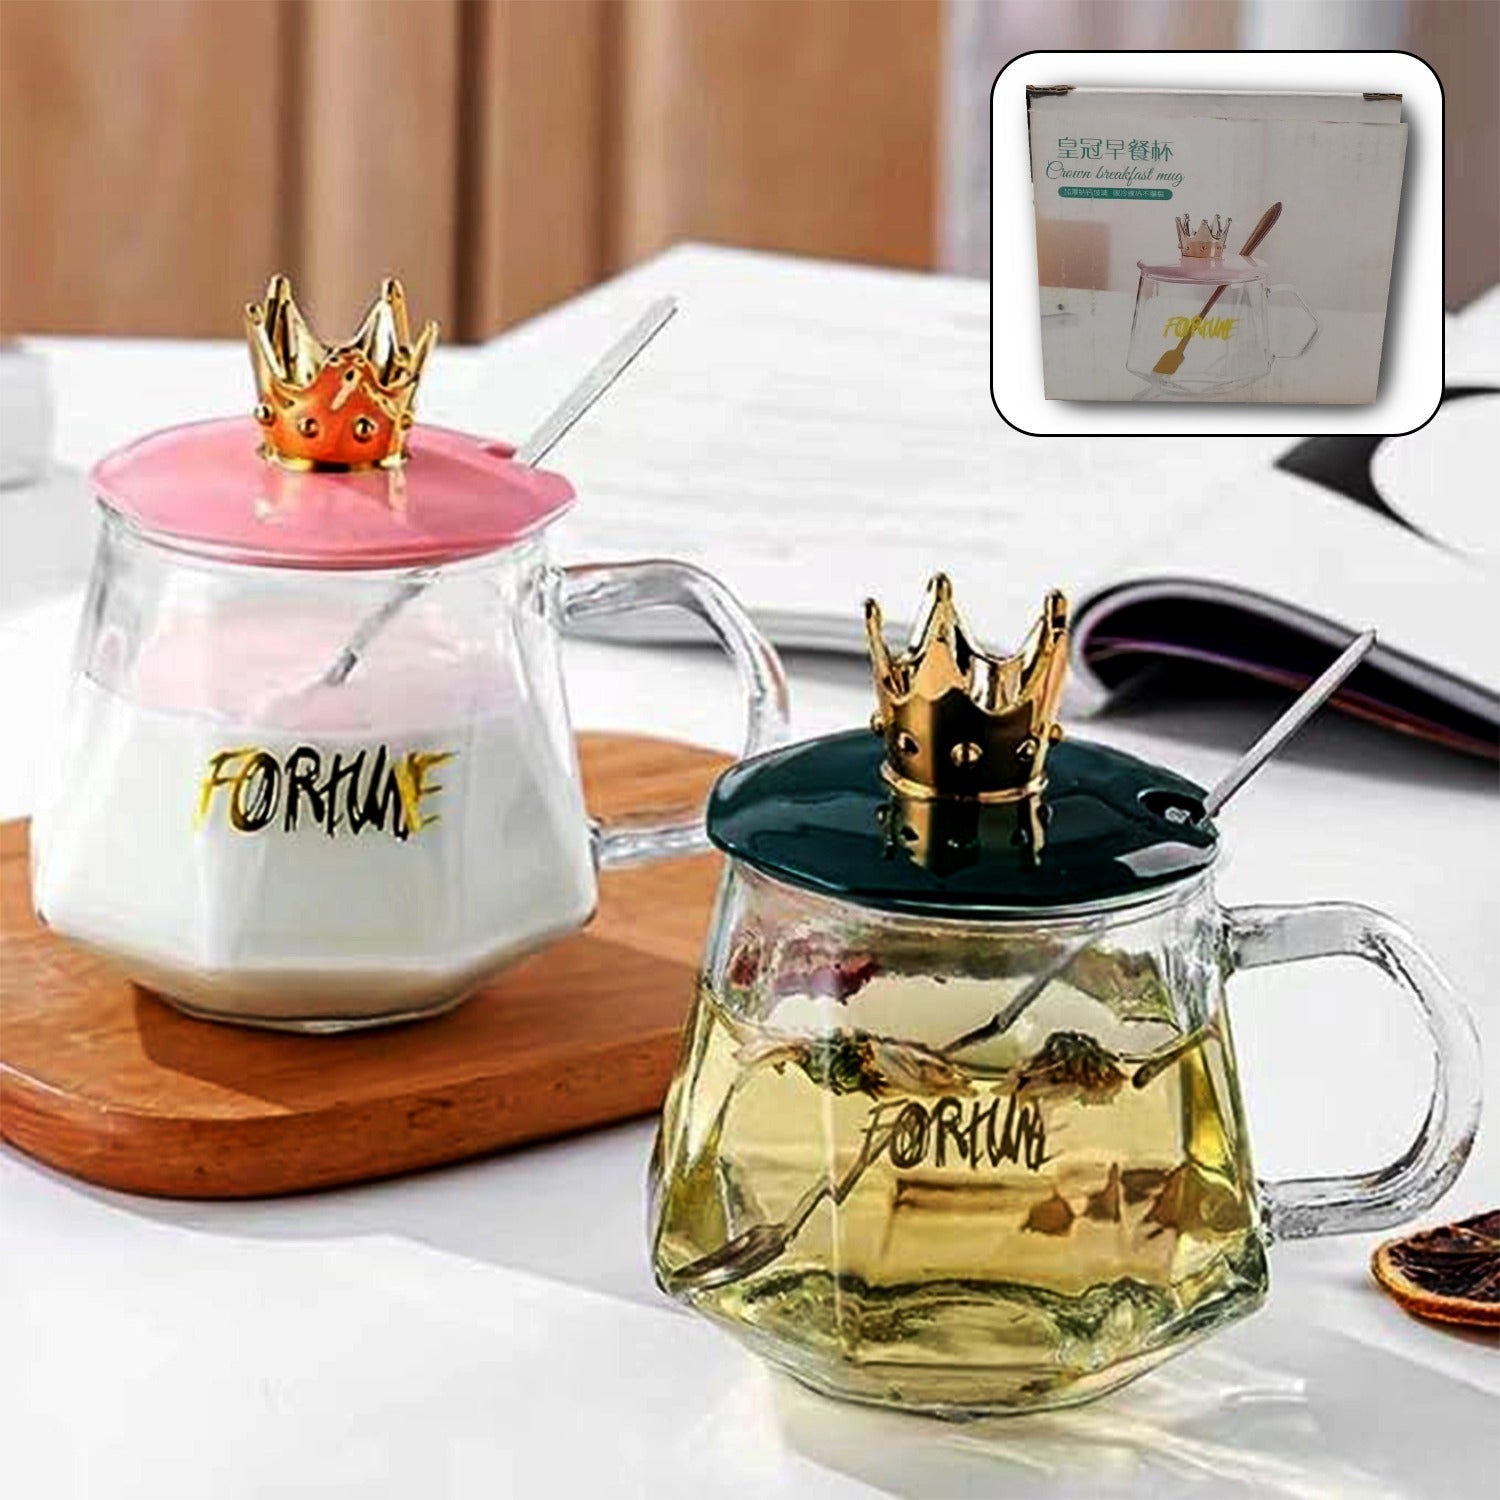 Golden Crown Tea-Coffee Mug Set with Stainless Spoon - Clear Glass Cup for Milk, Chocolate, or Any Beverage (1 Pc)